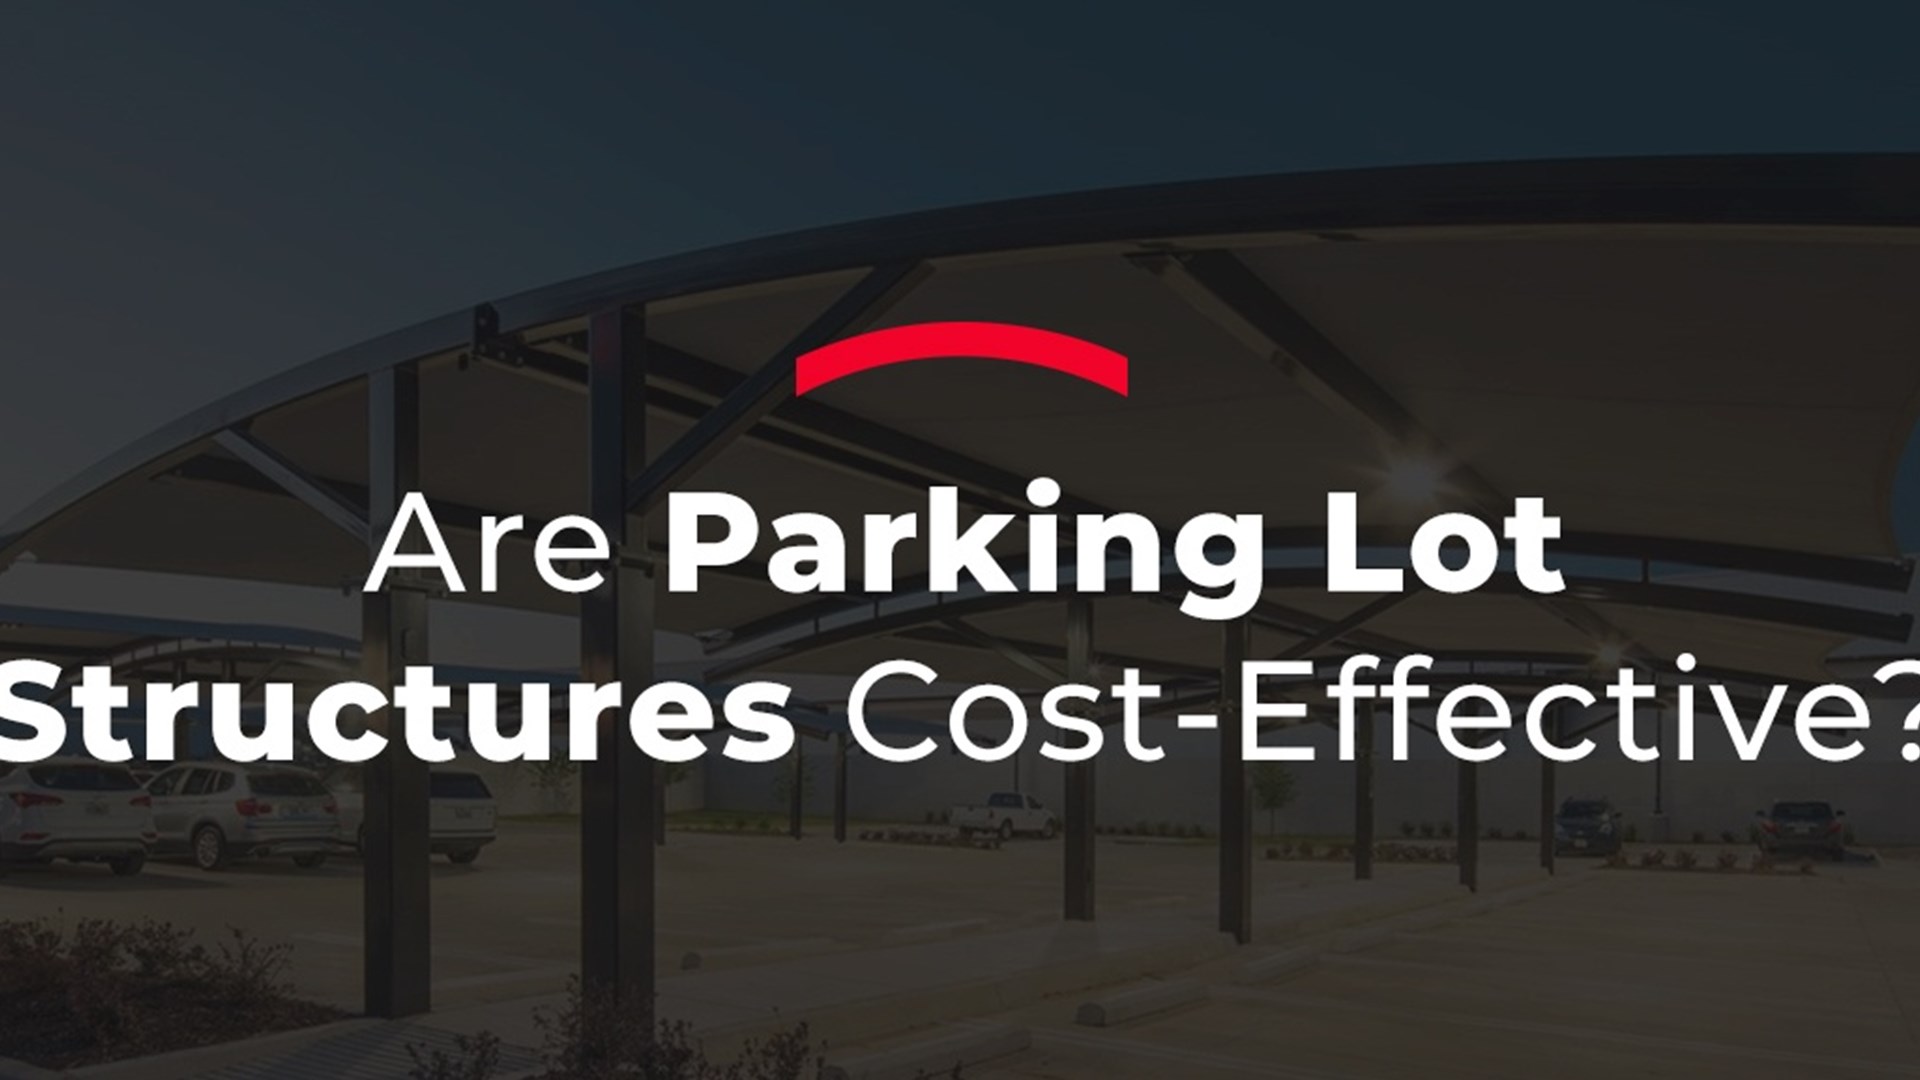 Cost effectiveness of parking lot structures